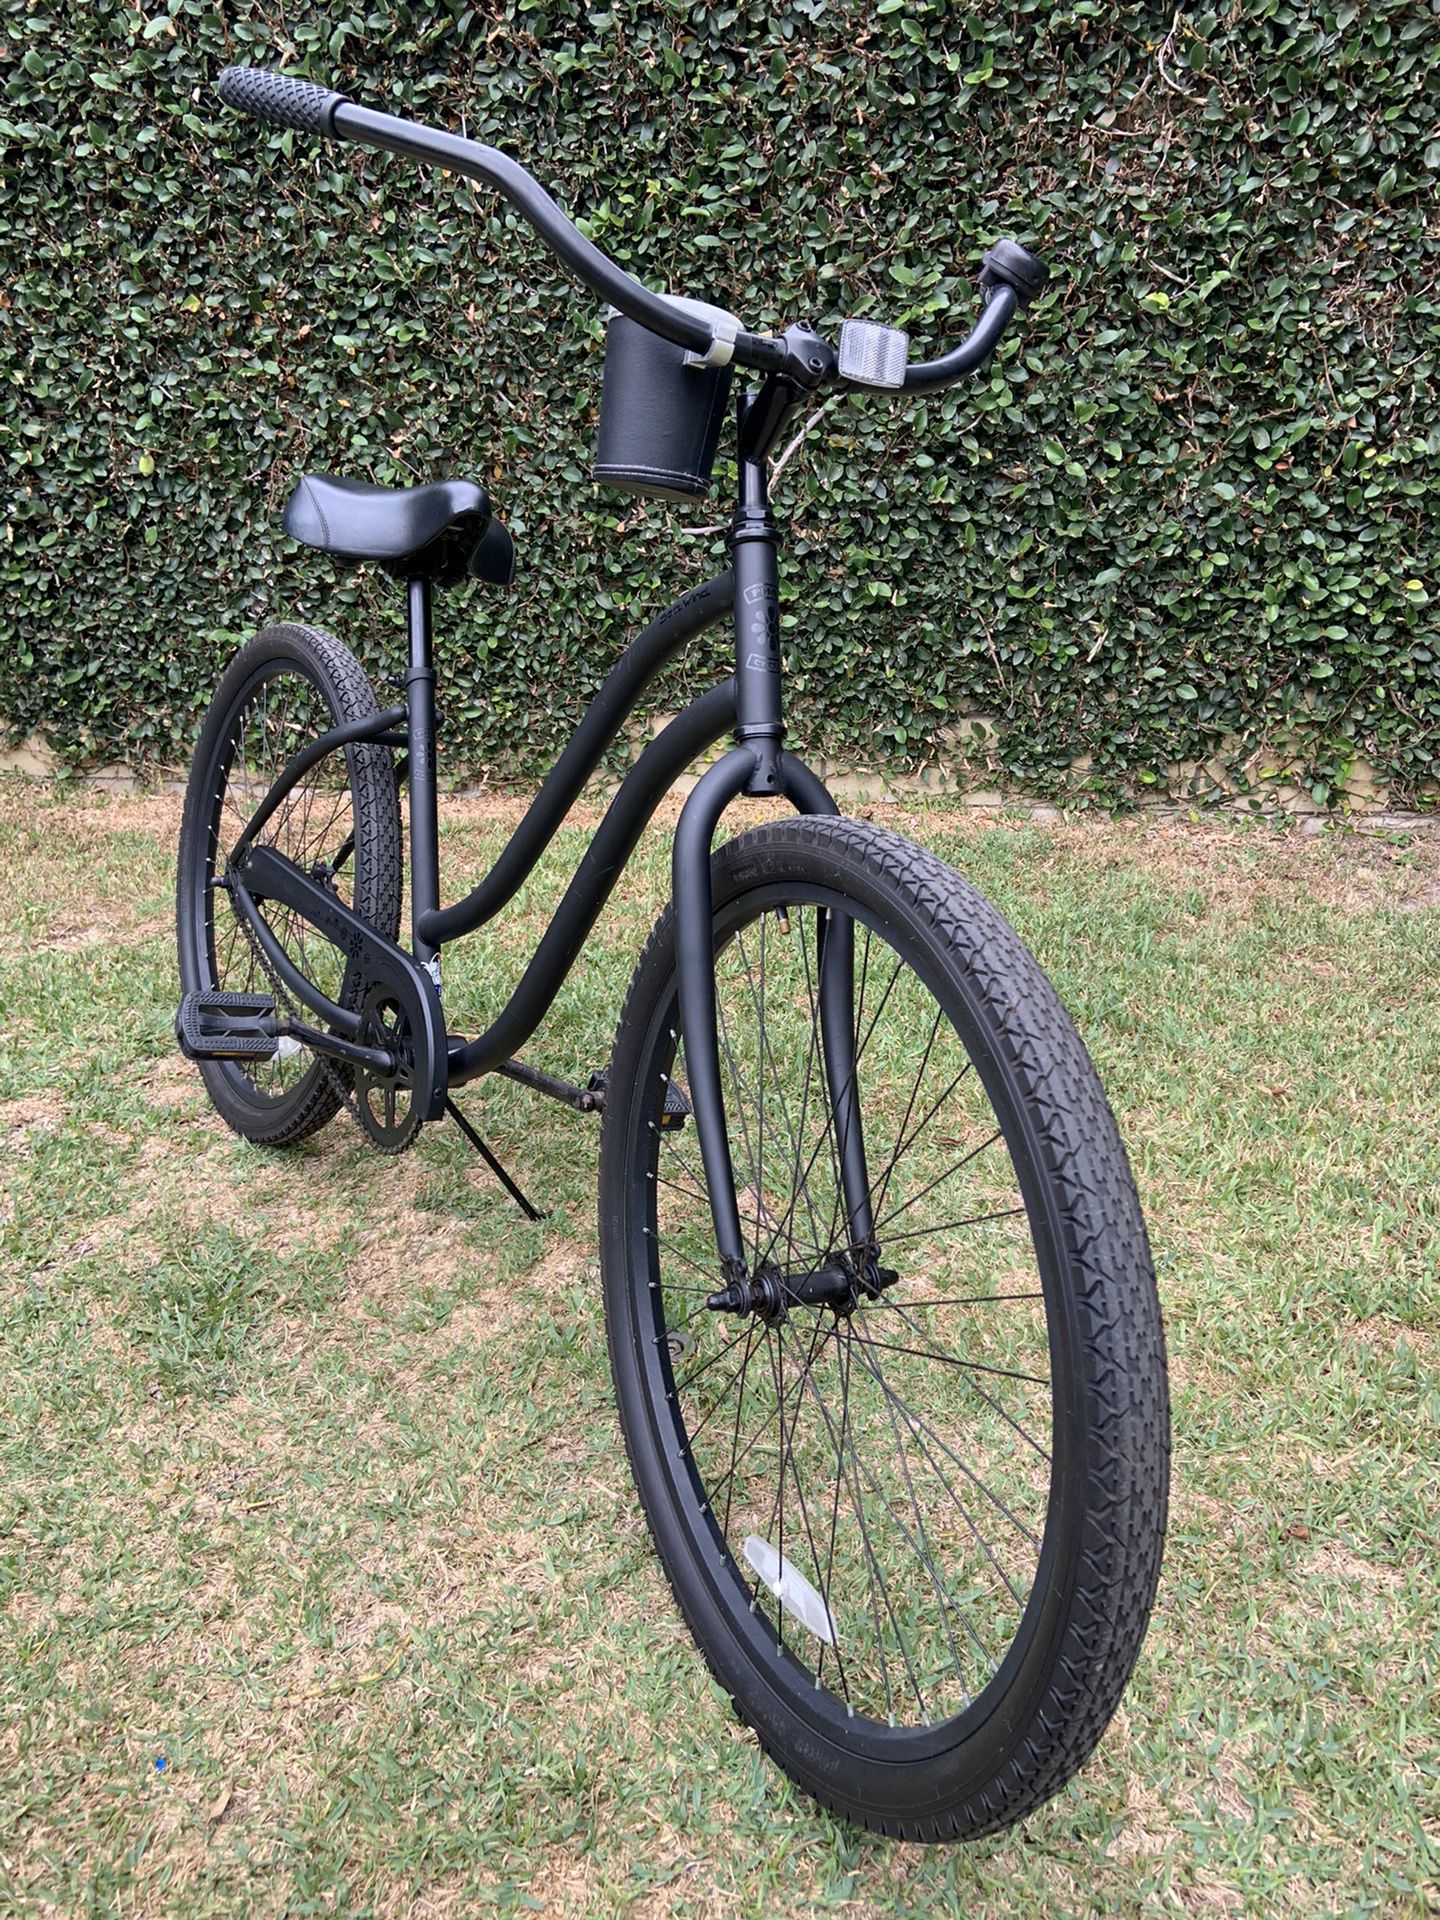 Blacked out Phat Cycles Sea Wind Beach Cruiser